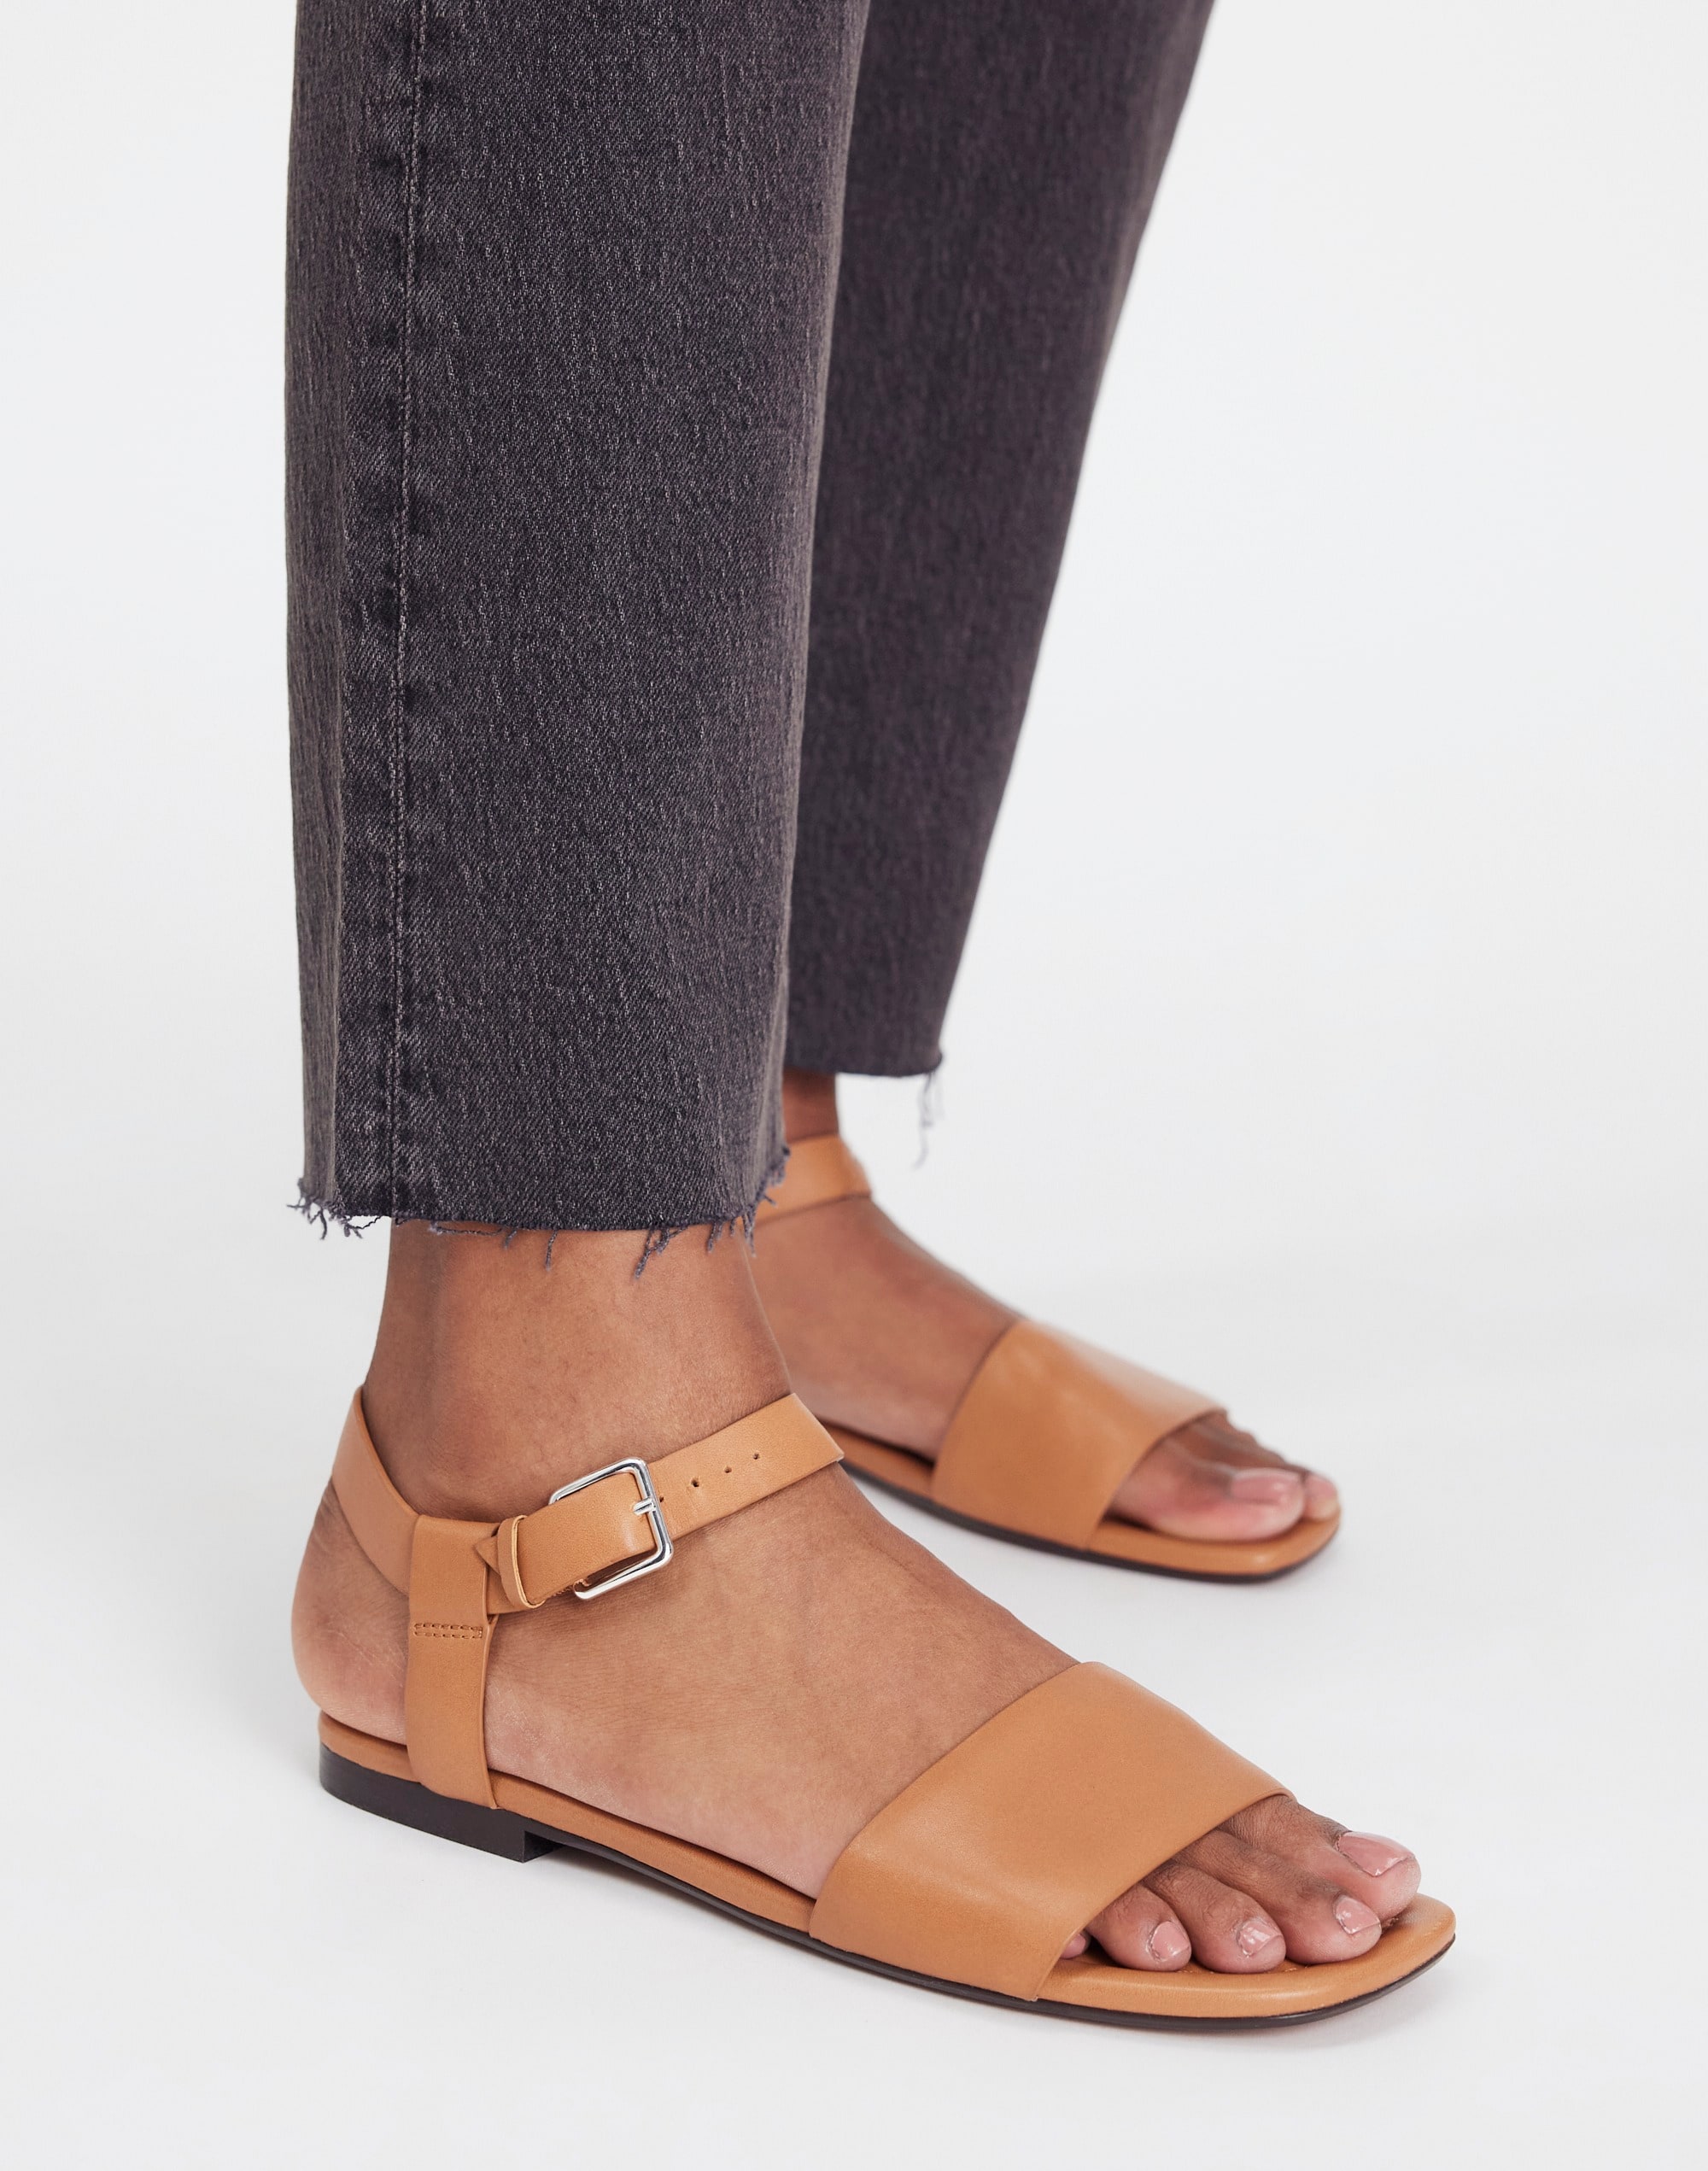 The Karla Ankle-Strap Sandal Leather